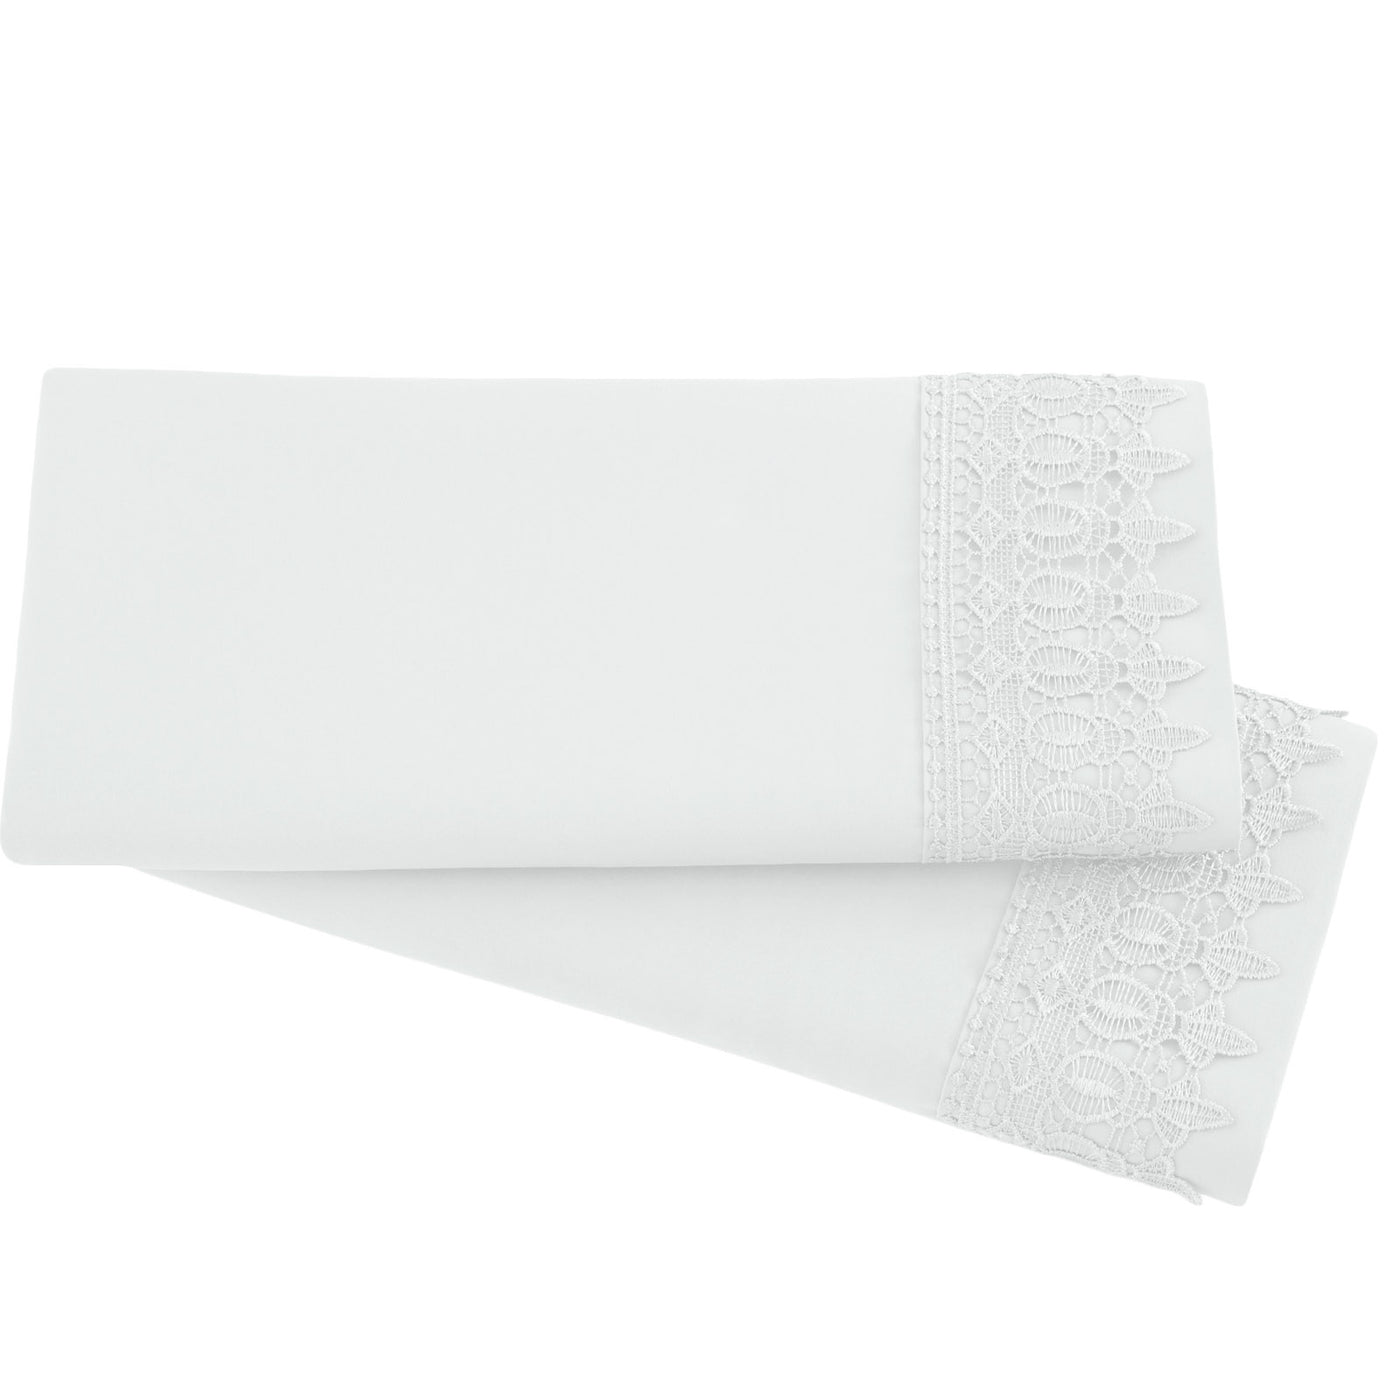 2-Piece Lace Pillowcase Set in White